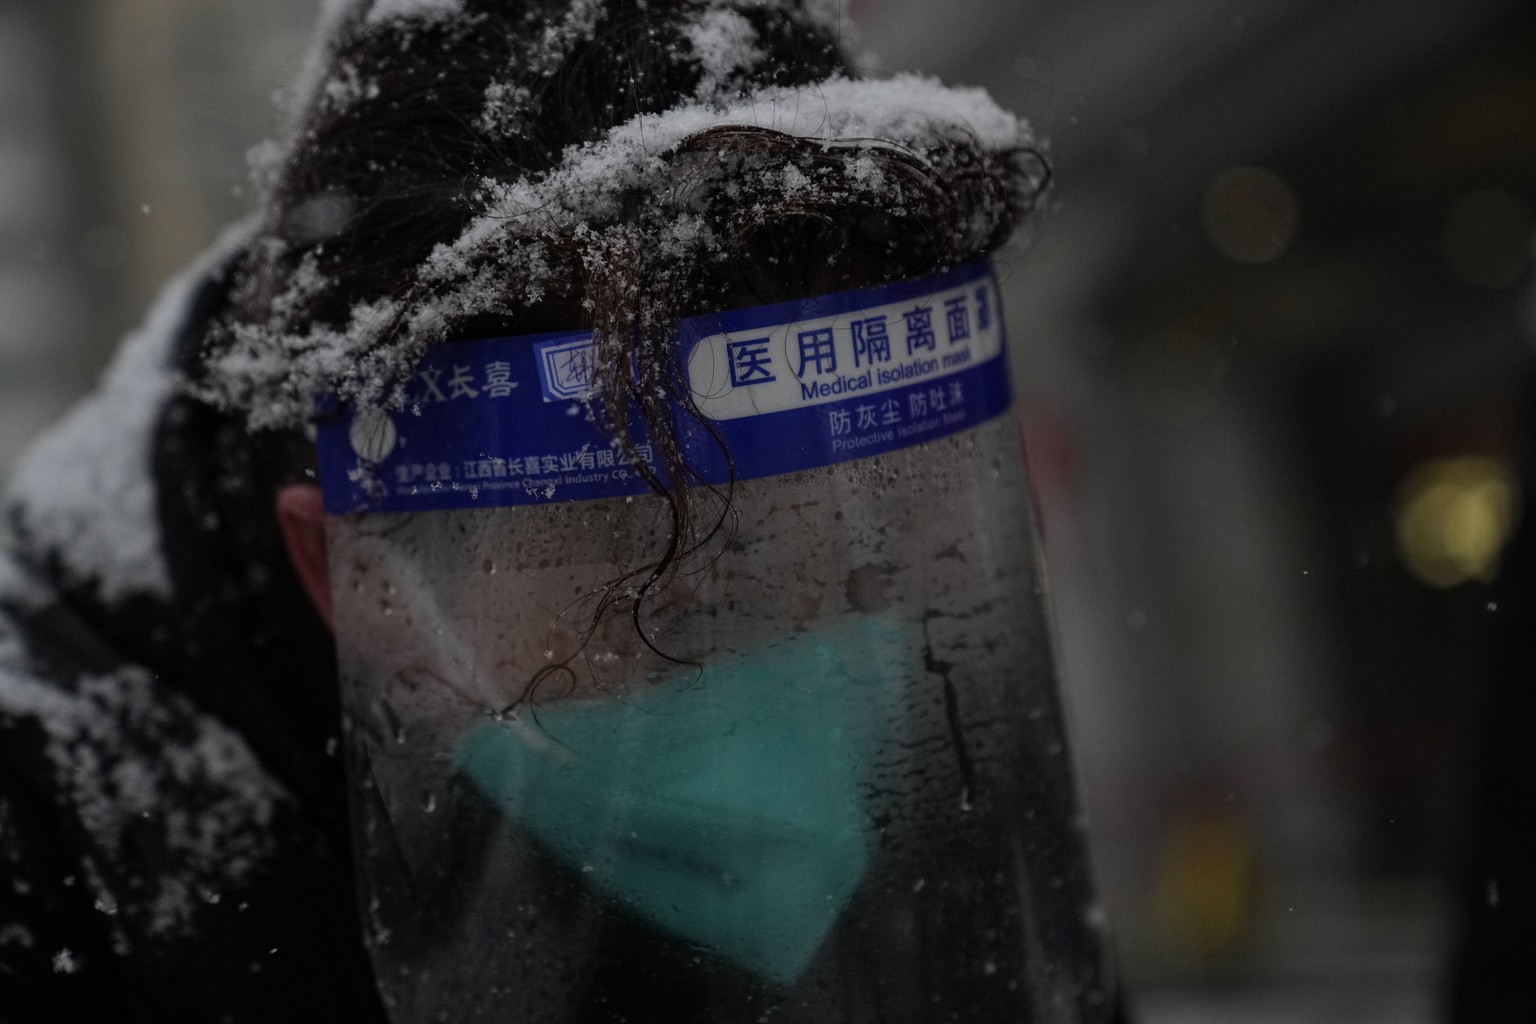 A person&#039;s hair is filled with snow during snowfall at the Beijing Winter Olympics Sunday, Feb. 13, 2022, in Beijing. (AP Photo/Brynn Anderson)